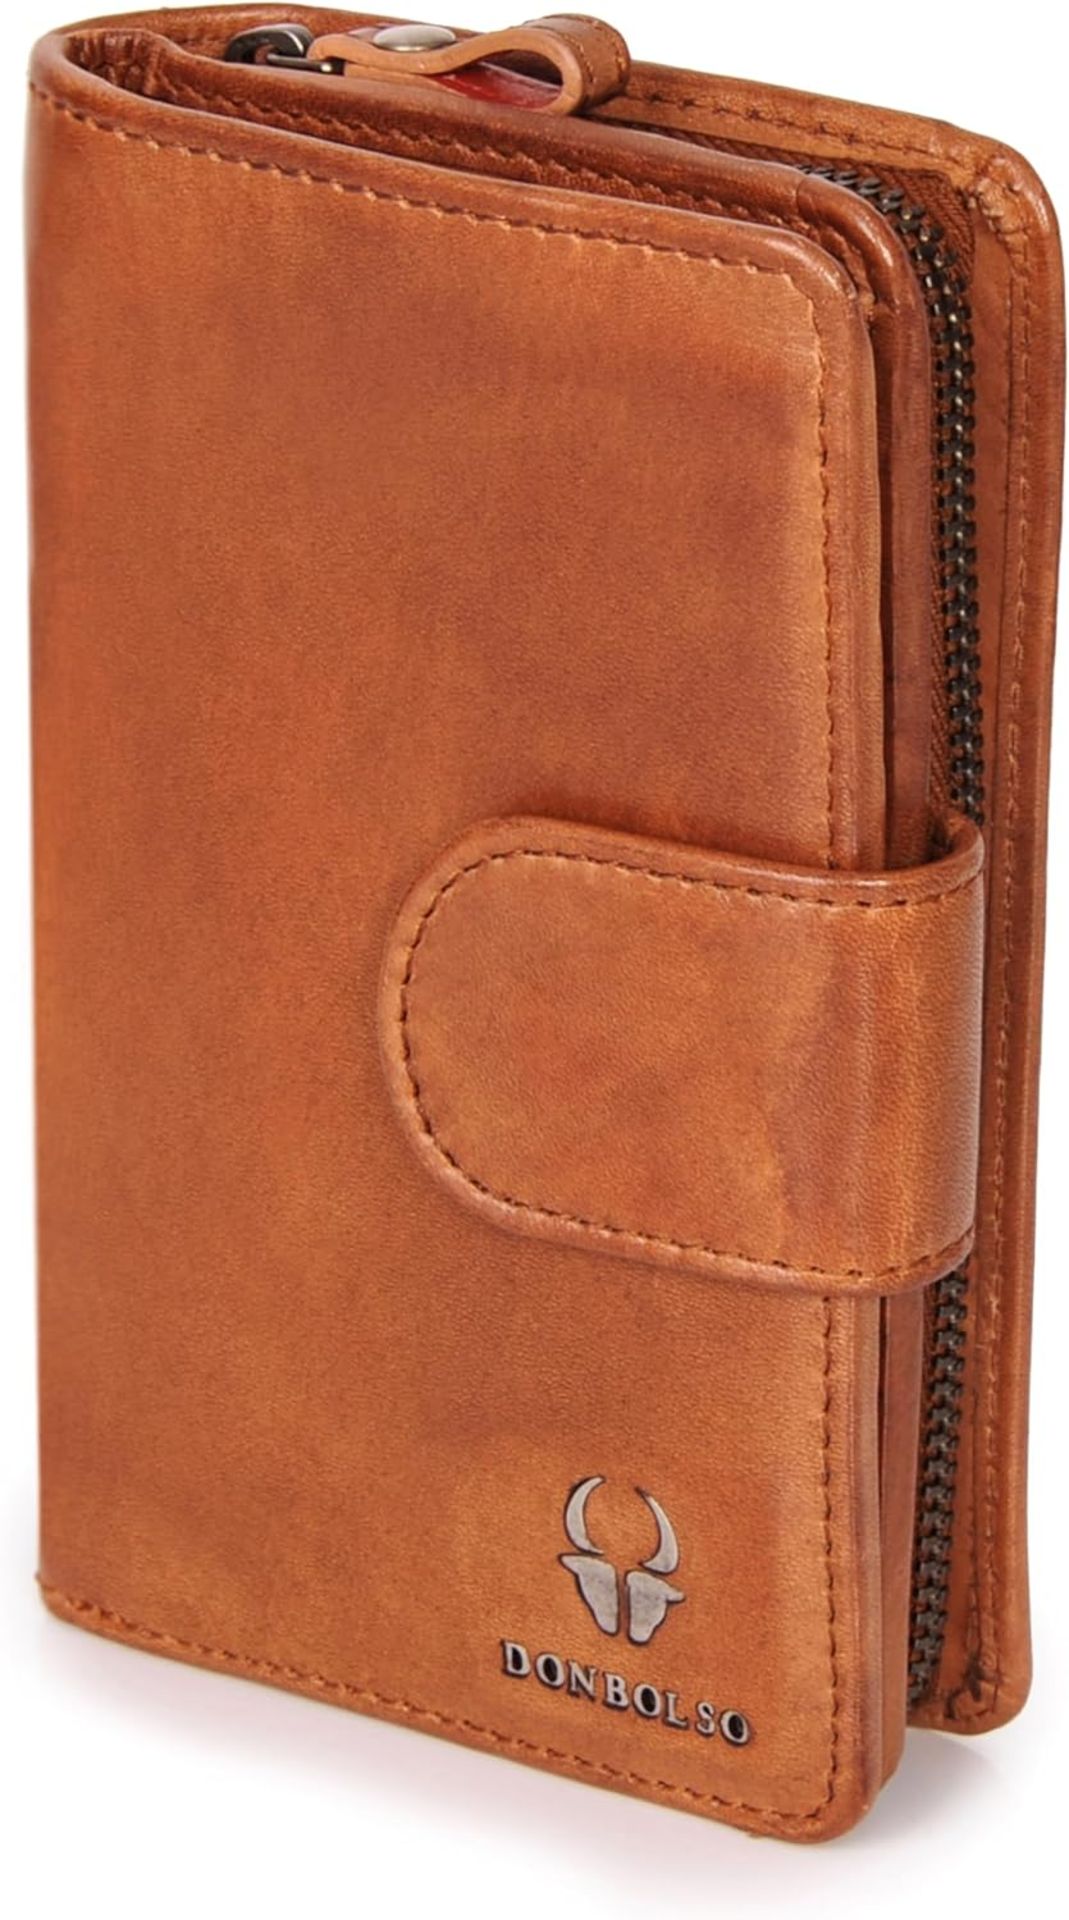 Approx RRP £500, Collection of DONBOLSO Genuine Leather Wallets, 25 Pieces - Image 2 of 4